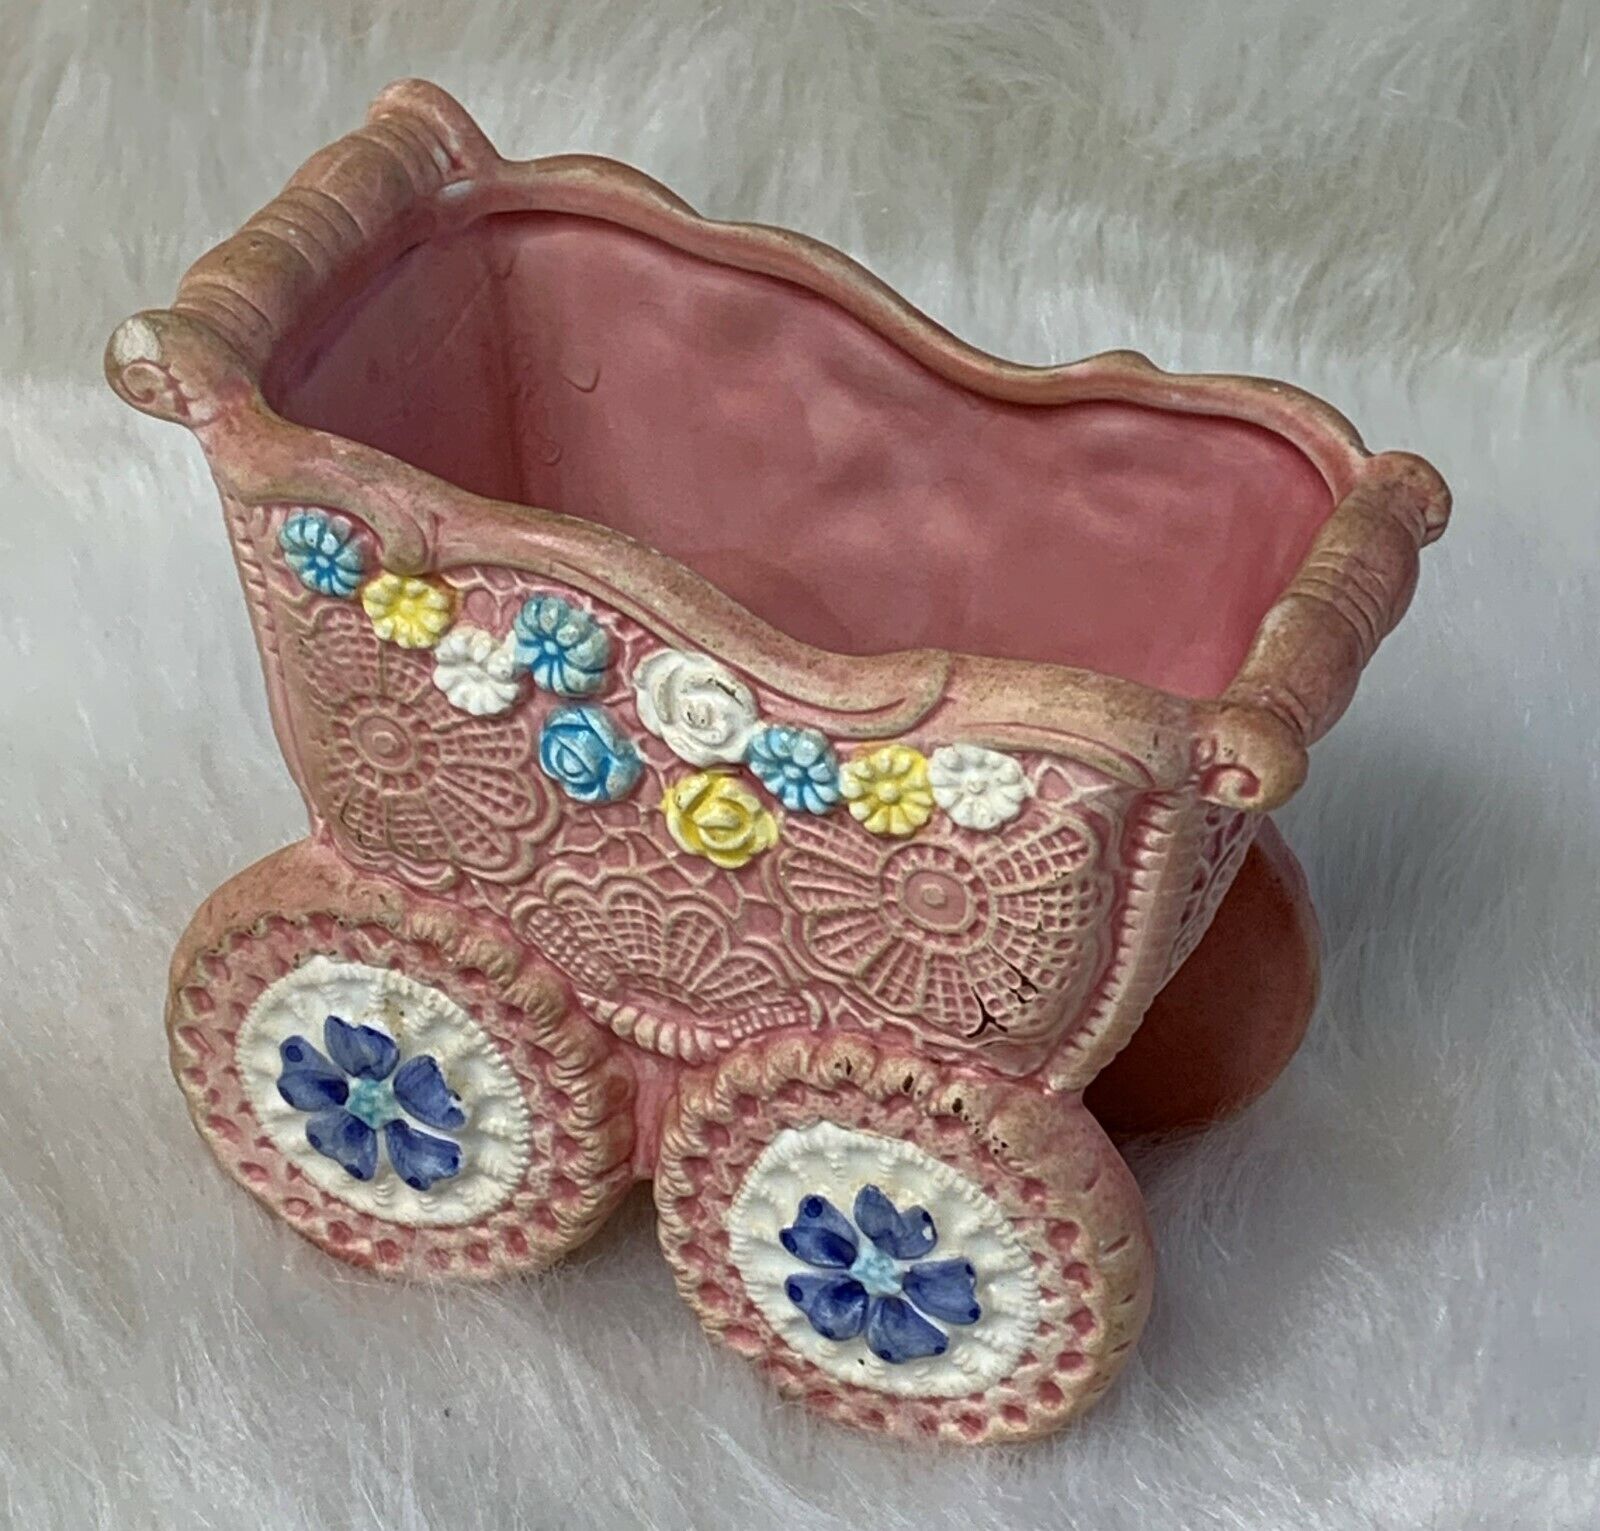 Napco Vintage Collectible Baby Buggy Planter Pink Floral Japan 